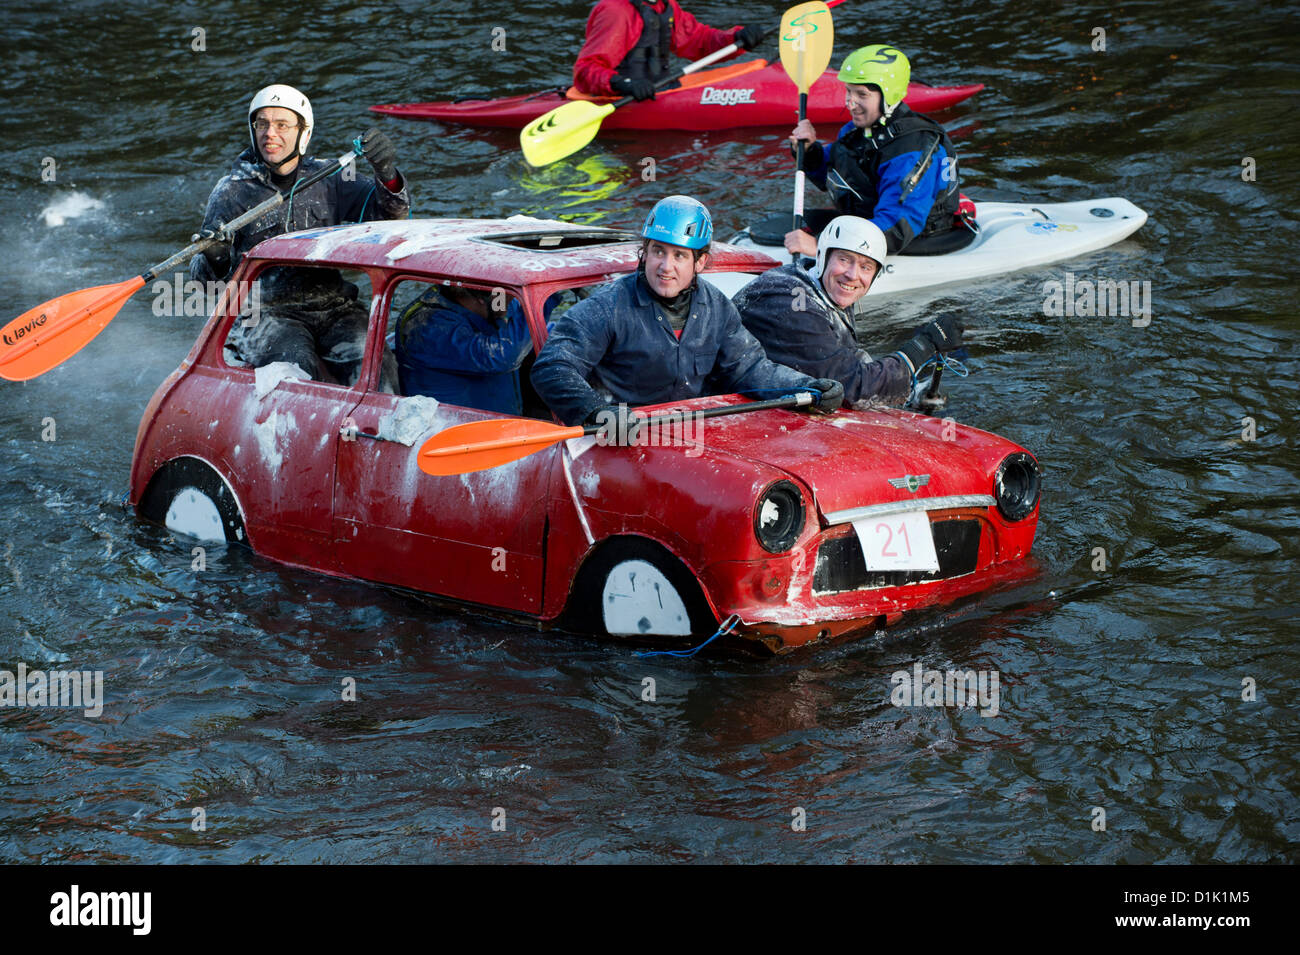 Matlock, UK. 26th Dec, 2012. A floating Mini car is pelted with flour bombs by spectators in the Matlock Raft race on Boxing Day. The charity event is organised by the Derbyshire Associtation of Sub-Aqua Clubs in aid of the RNLI. Stock Photo